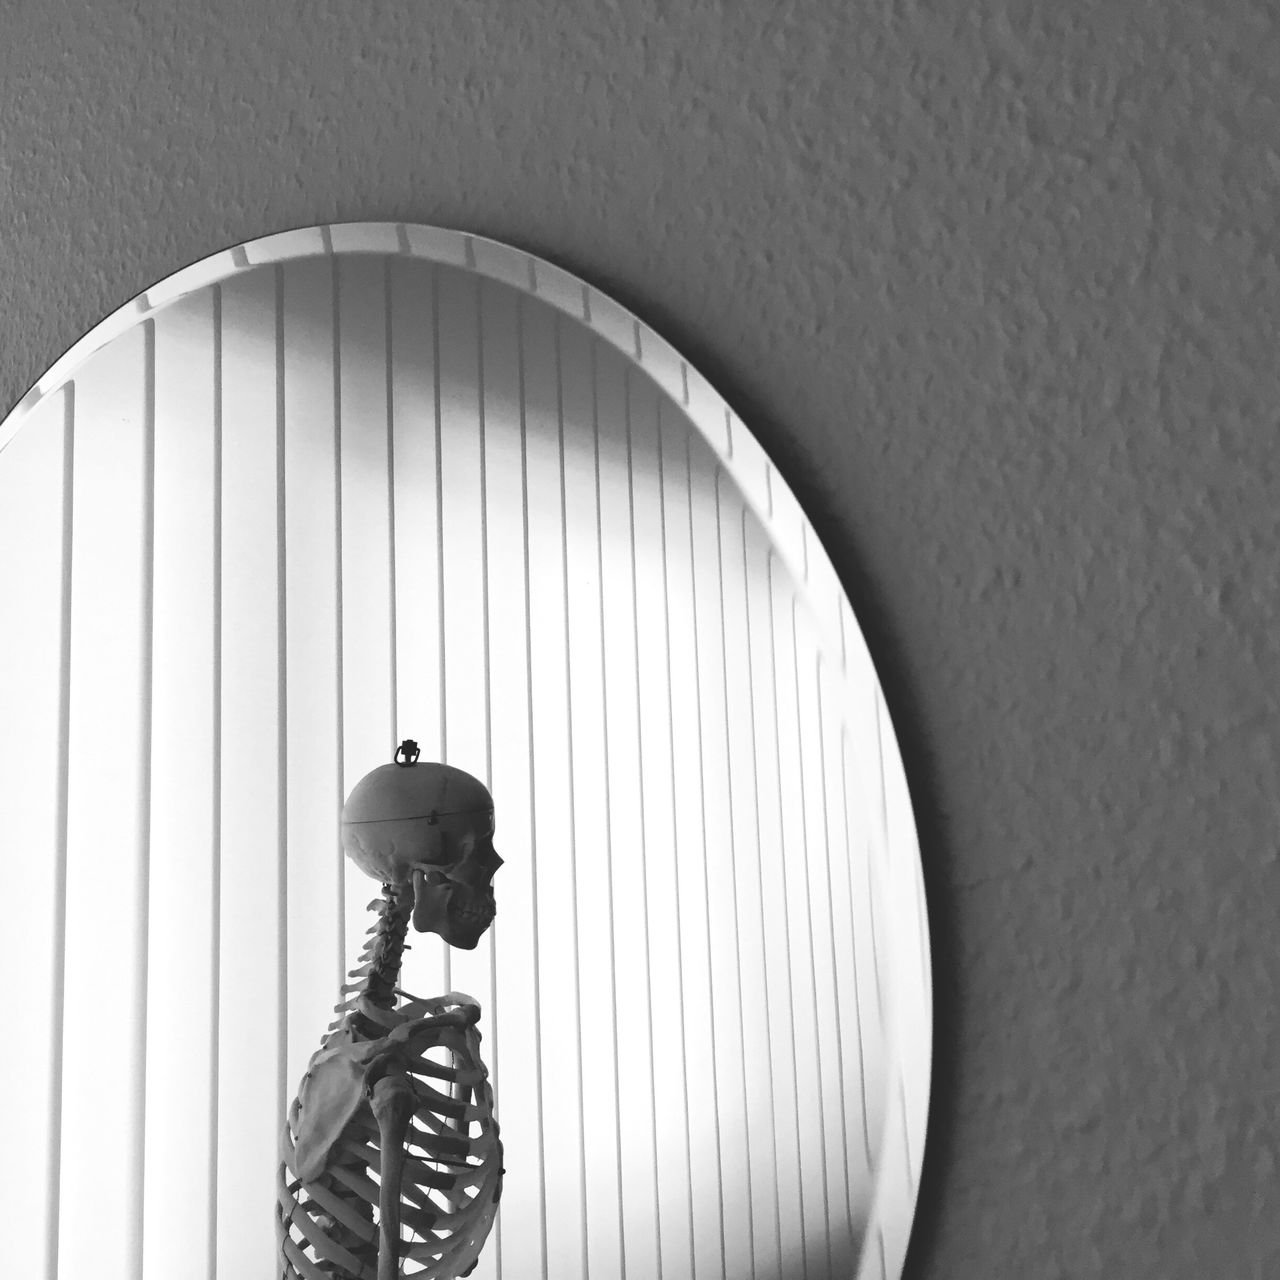 Reflection of skeleton in mirror on wall